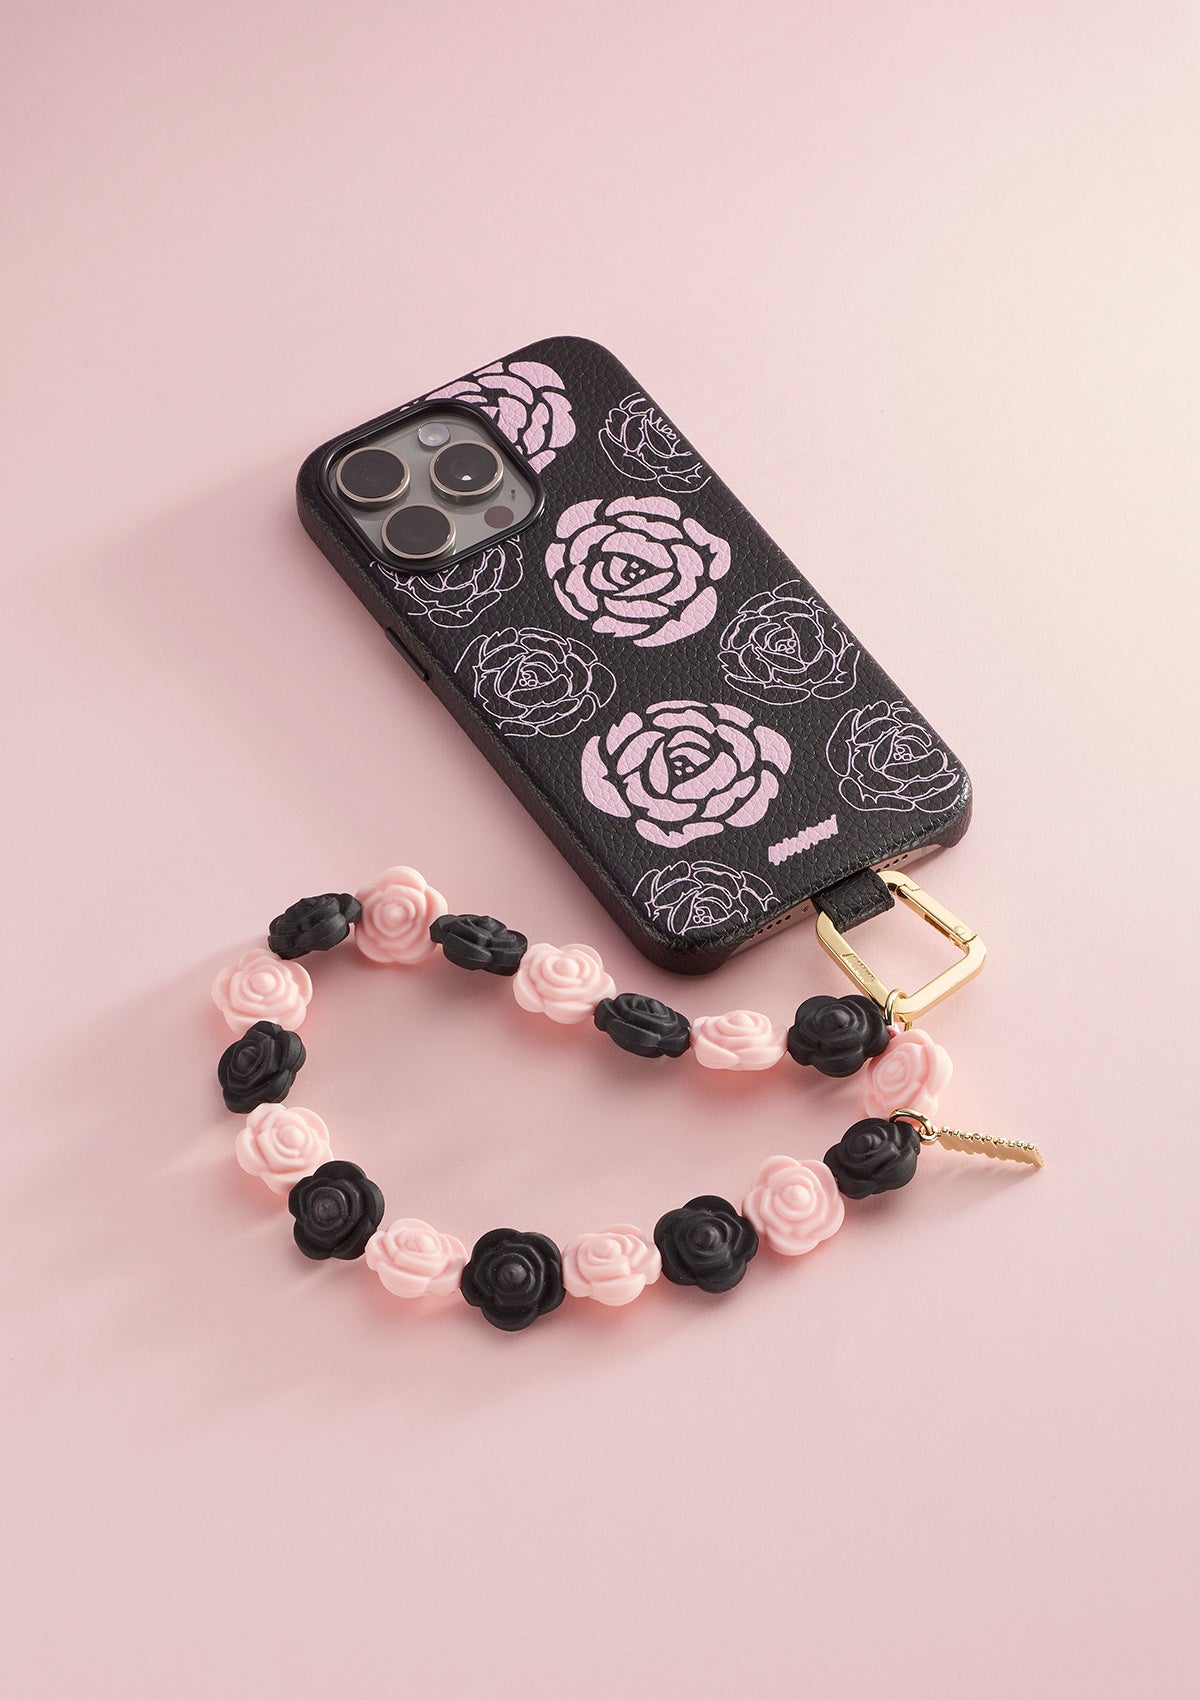 Cover_iPhone_Floral_Phone_Strap_Floral_Untags_rosa_nero